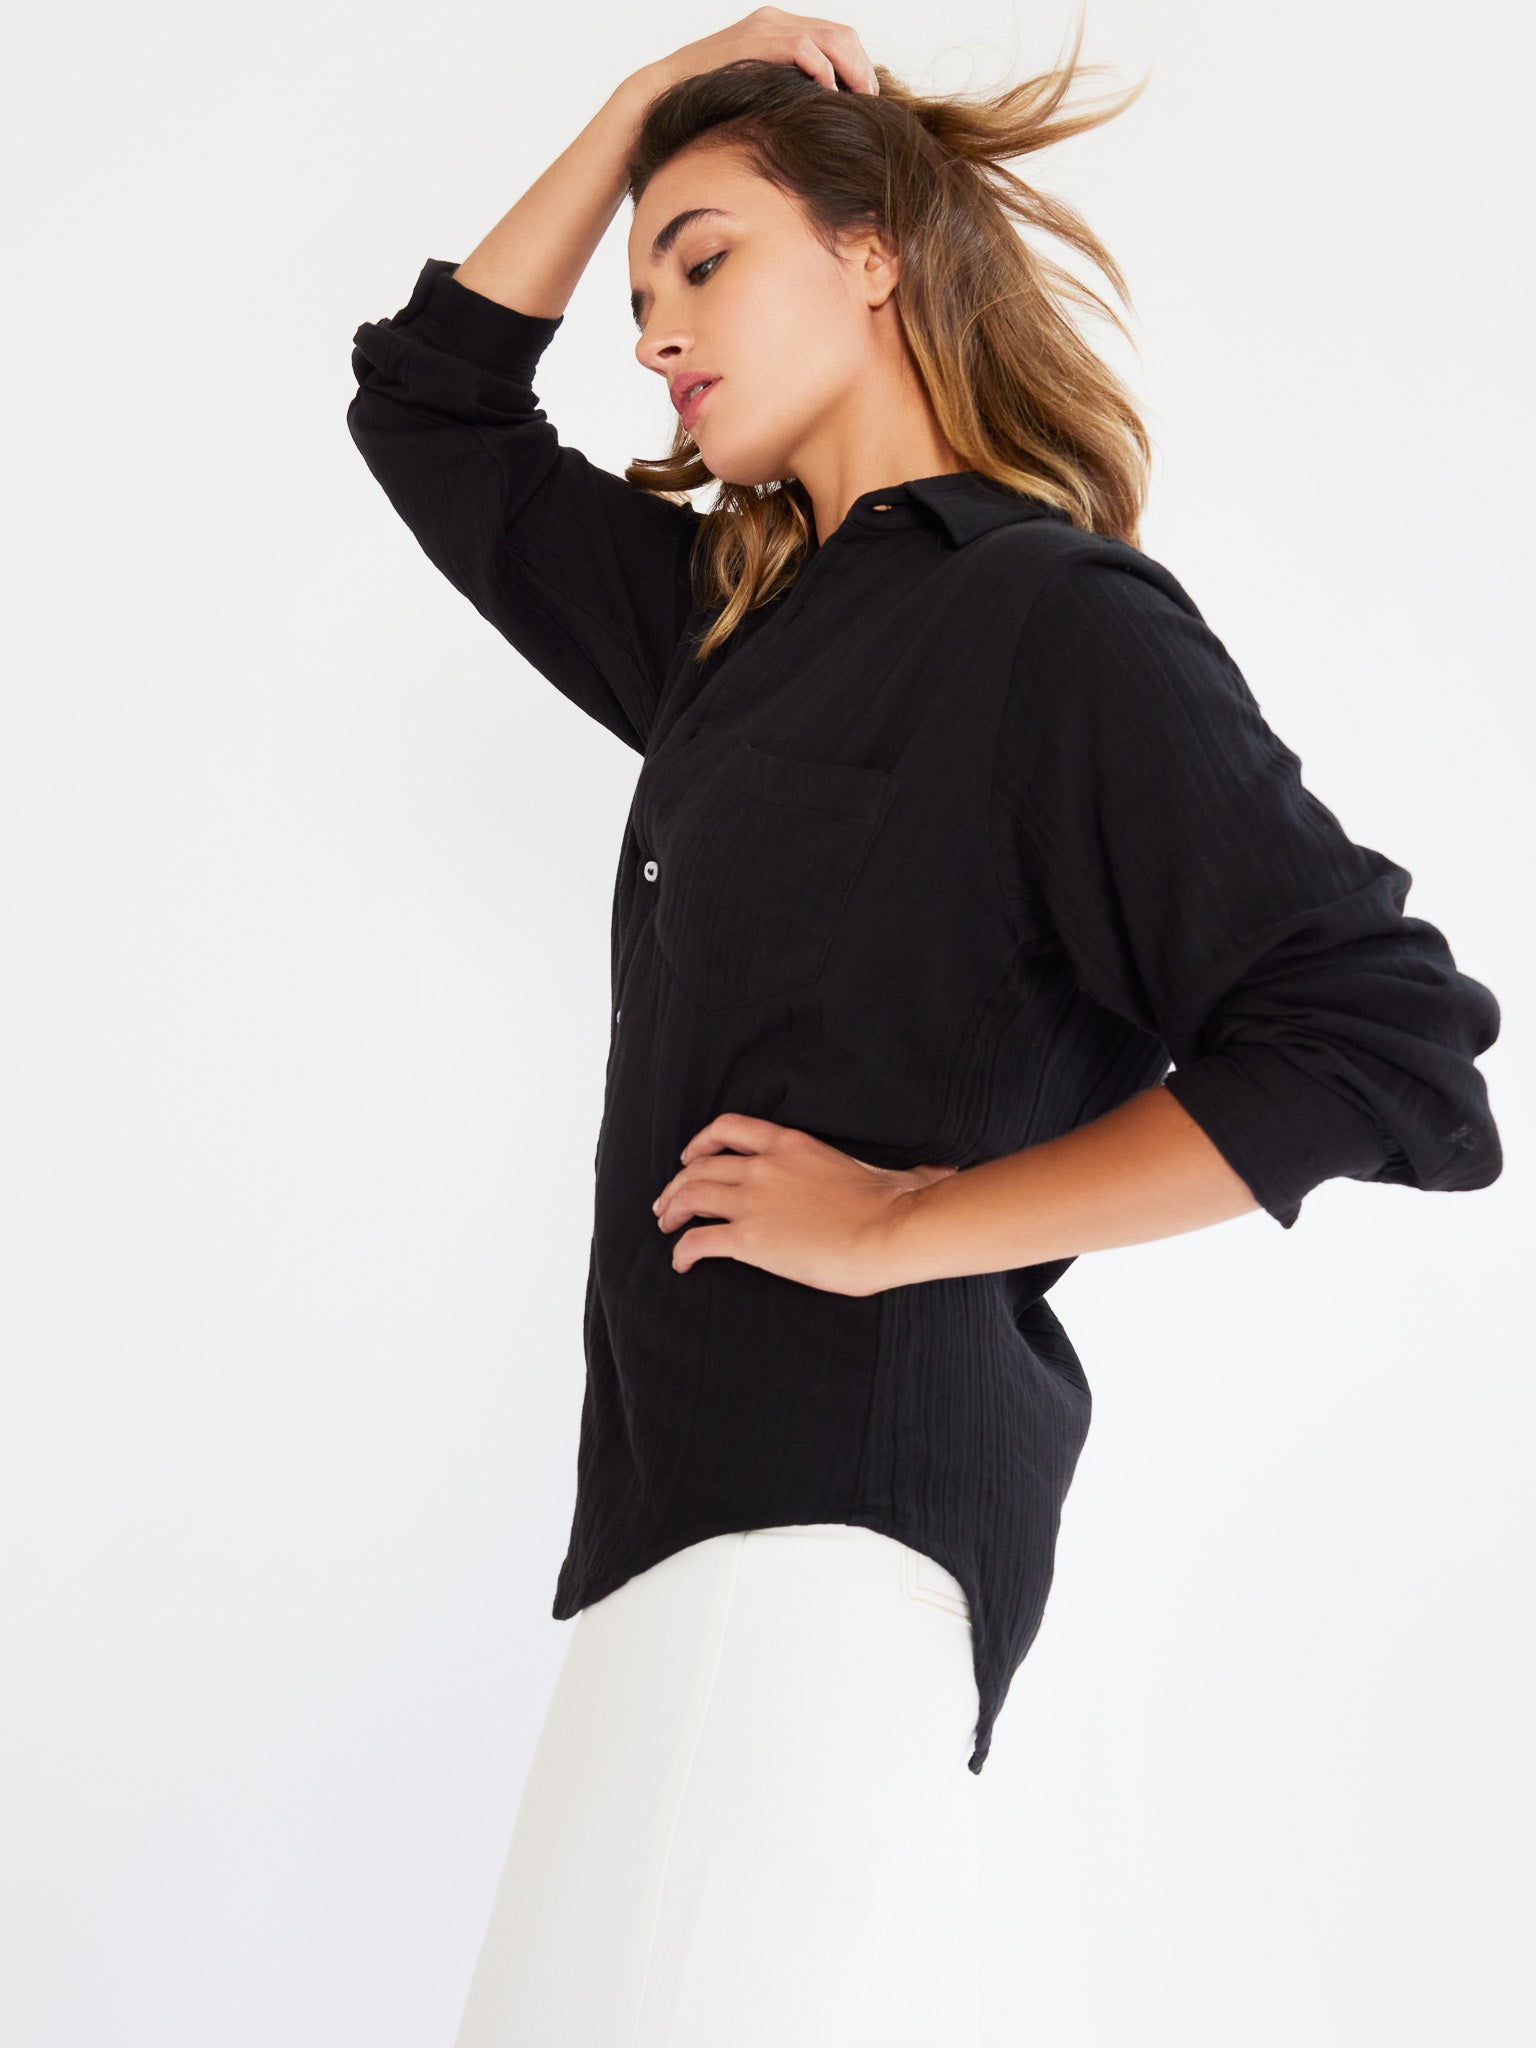 MILLE Clothing Sofia Top in Black Double Gauze